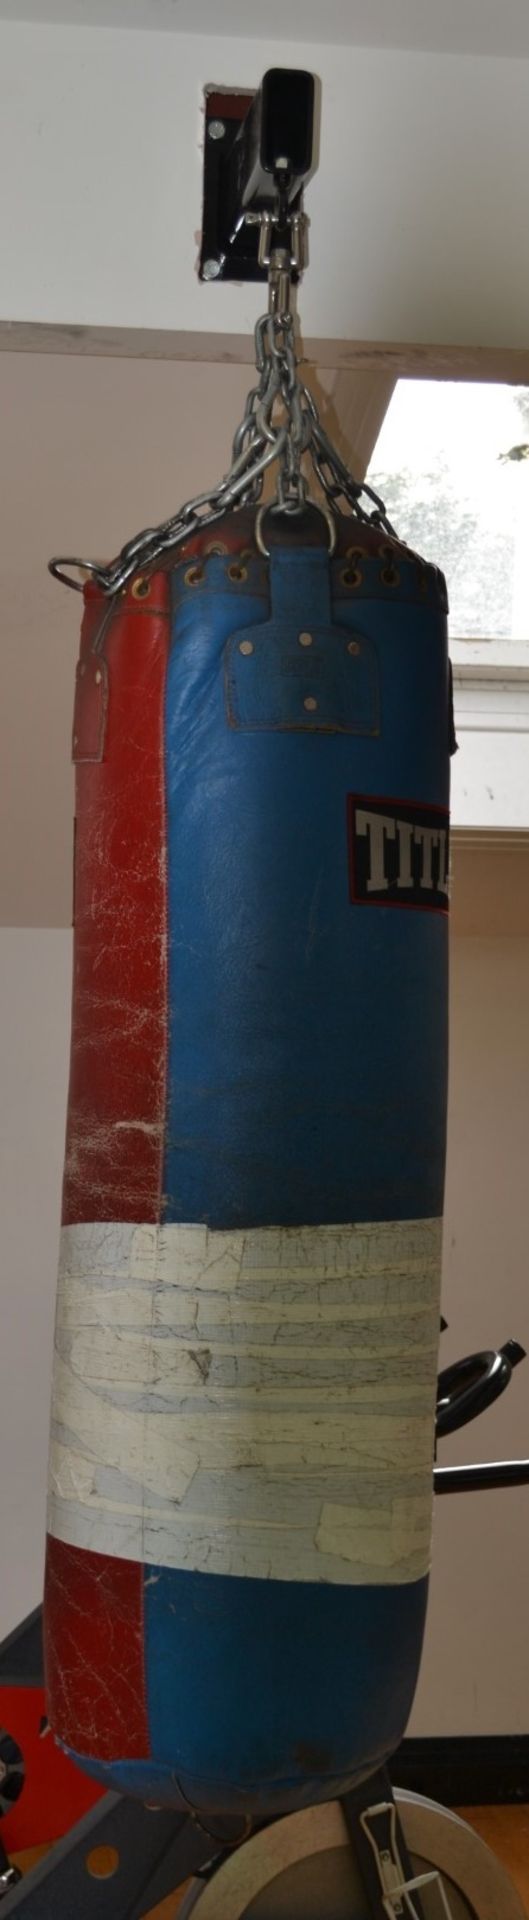 1 x Title Boxing Punch Bag With Wall Bracket and Hanging Chain - Ref: J2008/1FDS - CL356